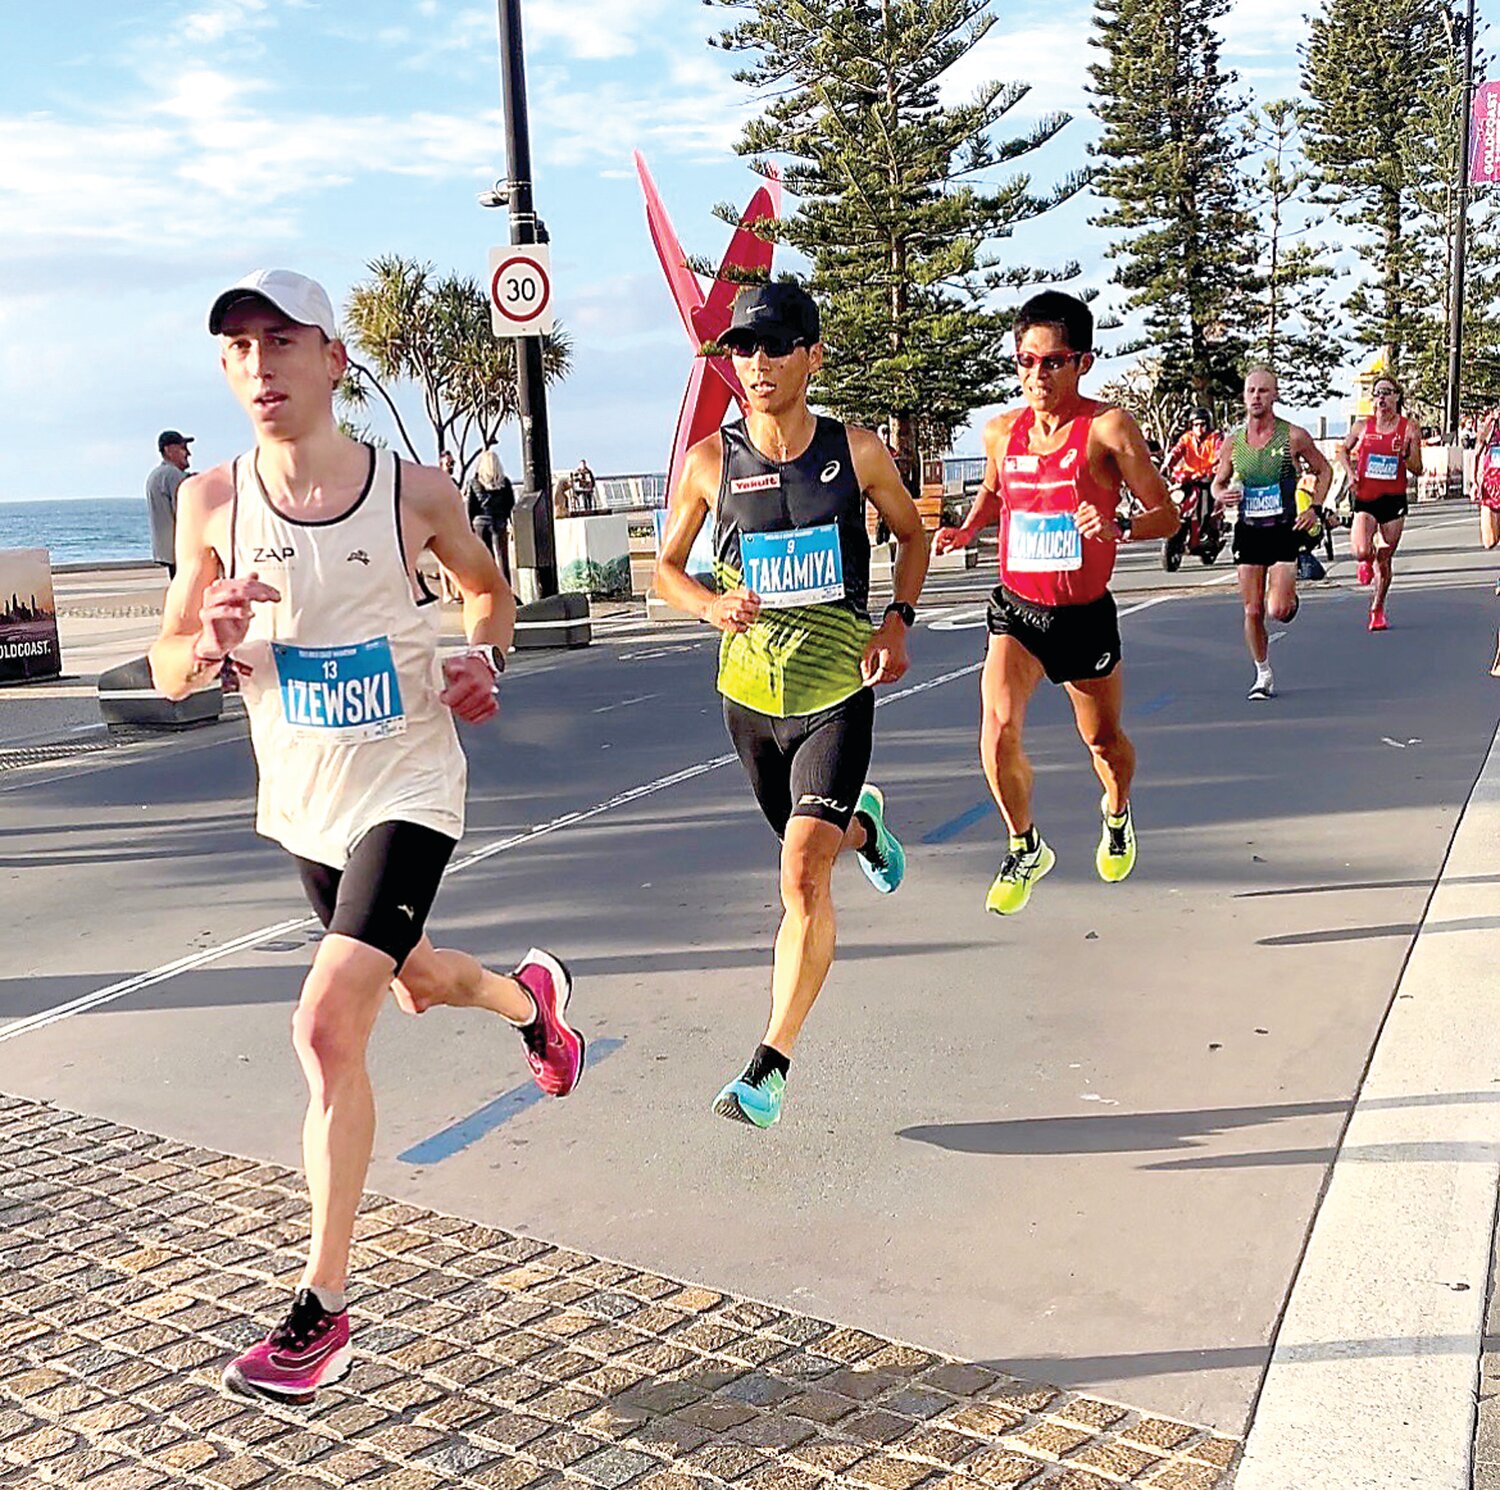 At this summer's Gold Coast Marathon in Australia, Central Bucks High School graduate Josh Izewski, left, finishes fifth overall in a personal record time of 2:11.26.